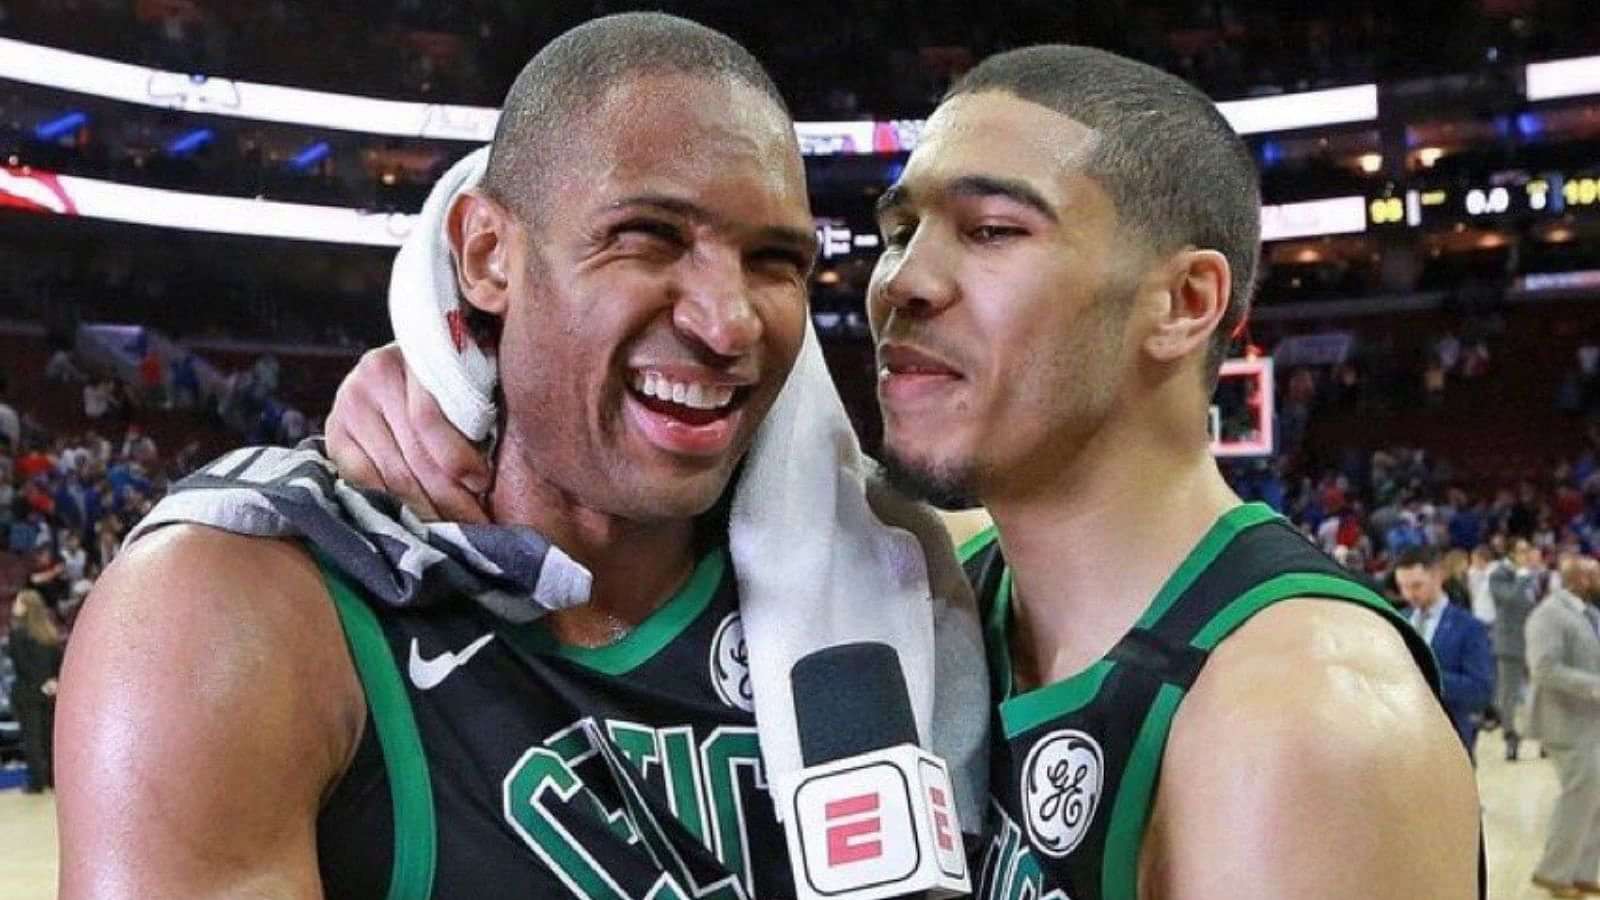 "Al Horford will get a bonus of $17 million if Celtics win the Finals": Dominican big man would be the highest beneficiary if C's go on to win it all